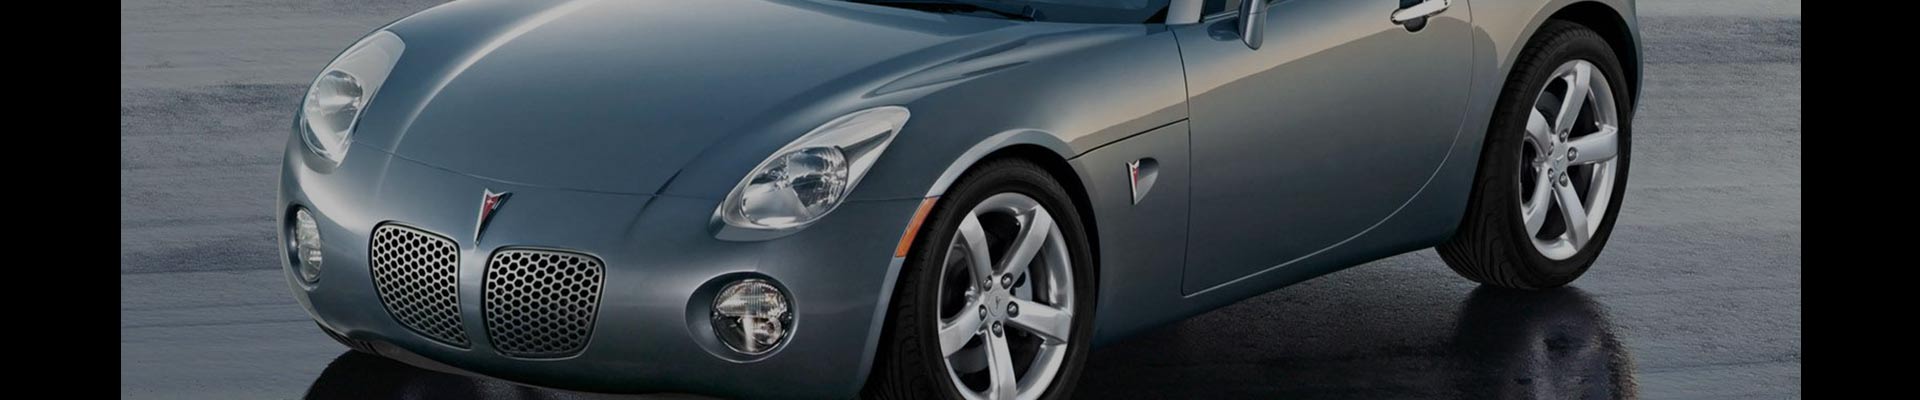 Shop Replacement and OEM 2007 Pontiac Solstice Parts with Discounted Price on the Net